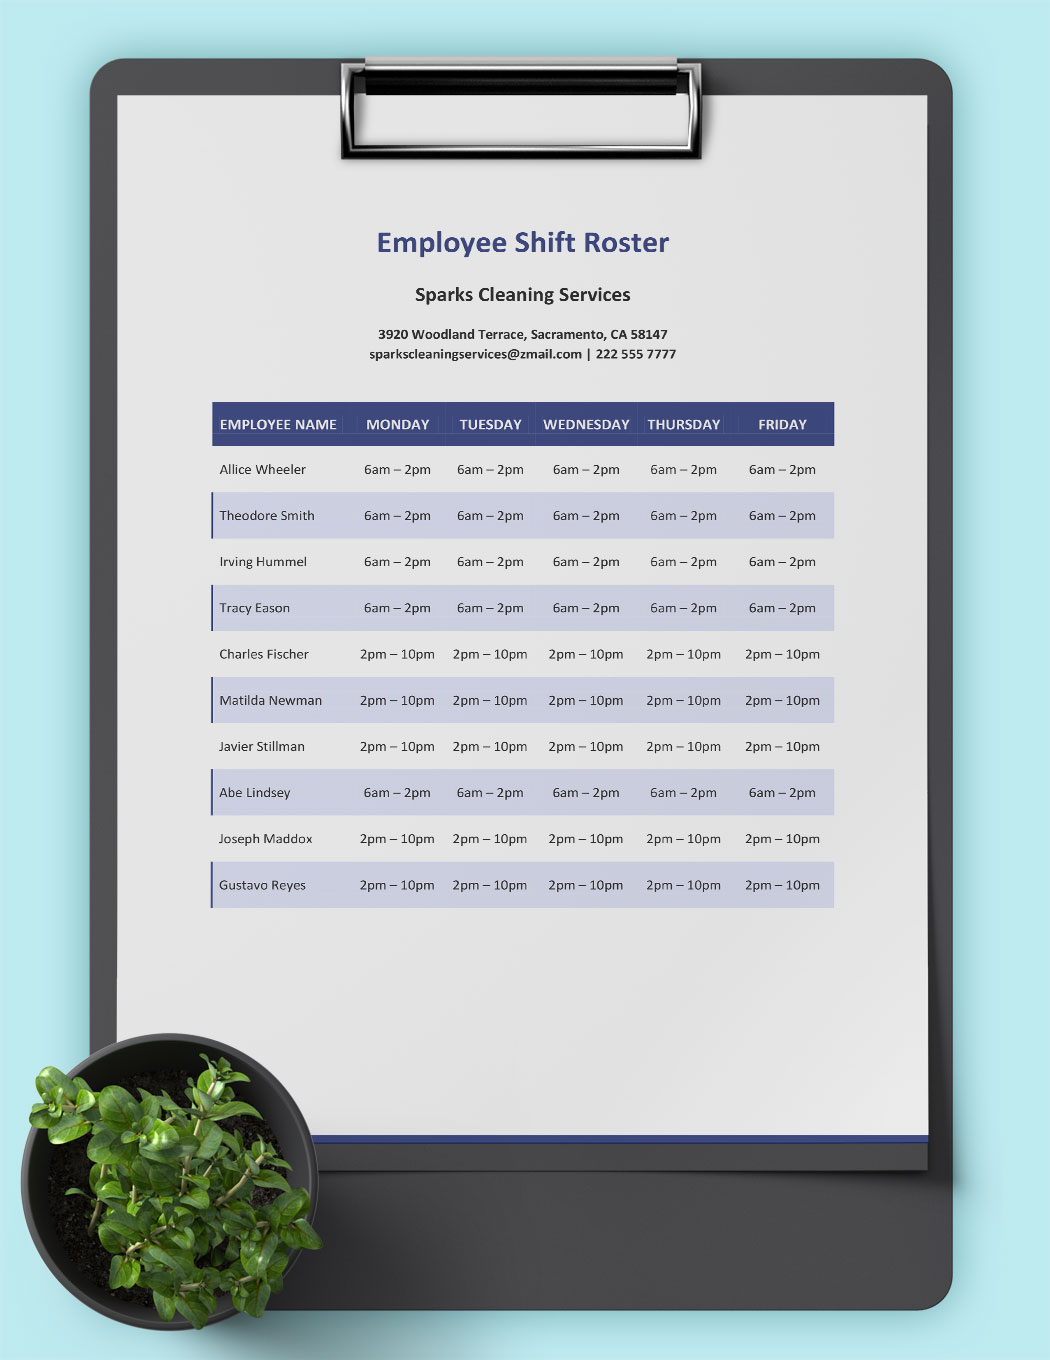 Employee Shift Roster Template